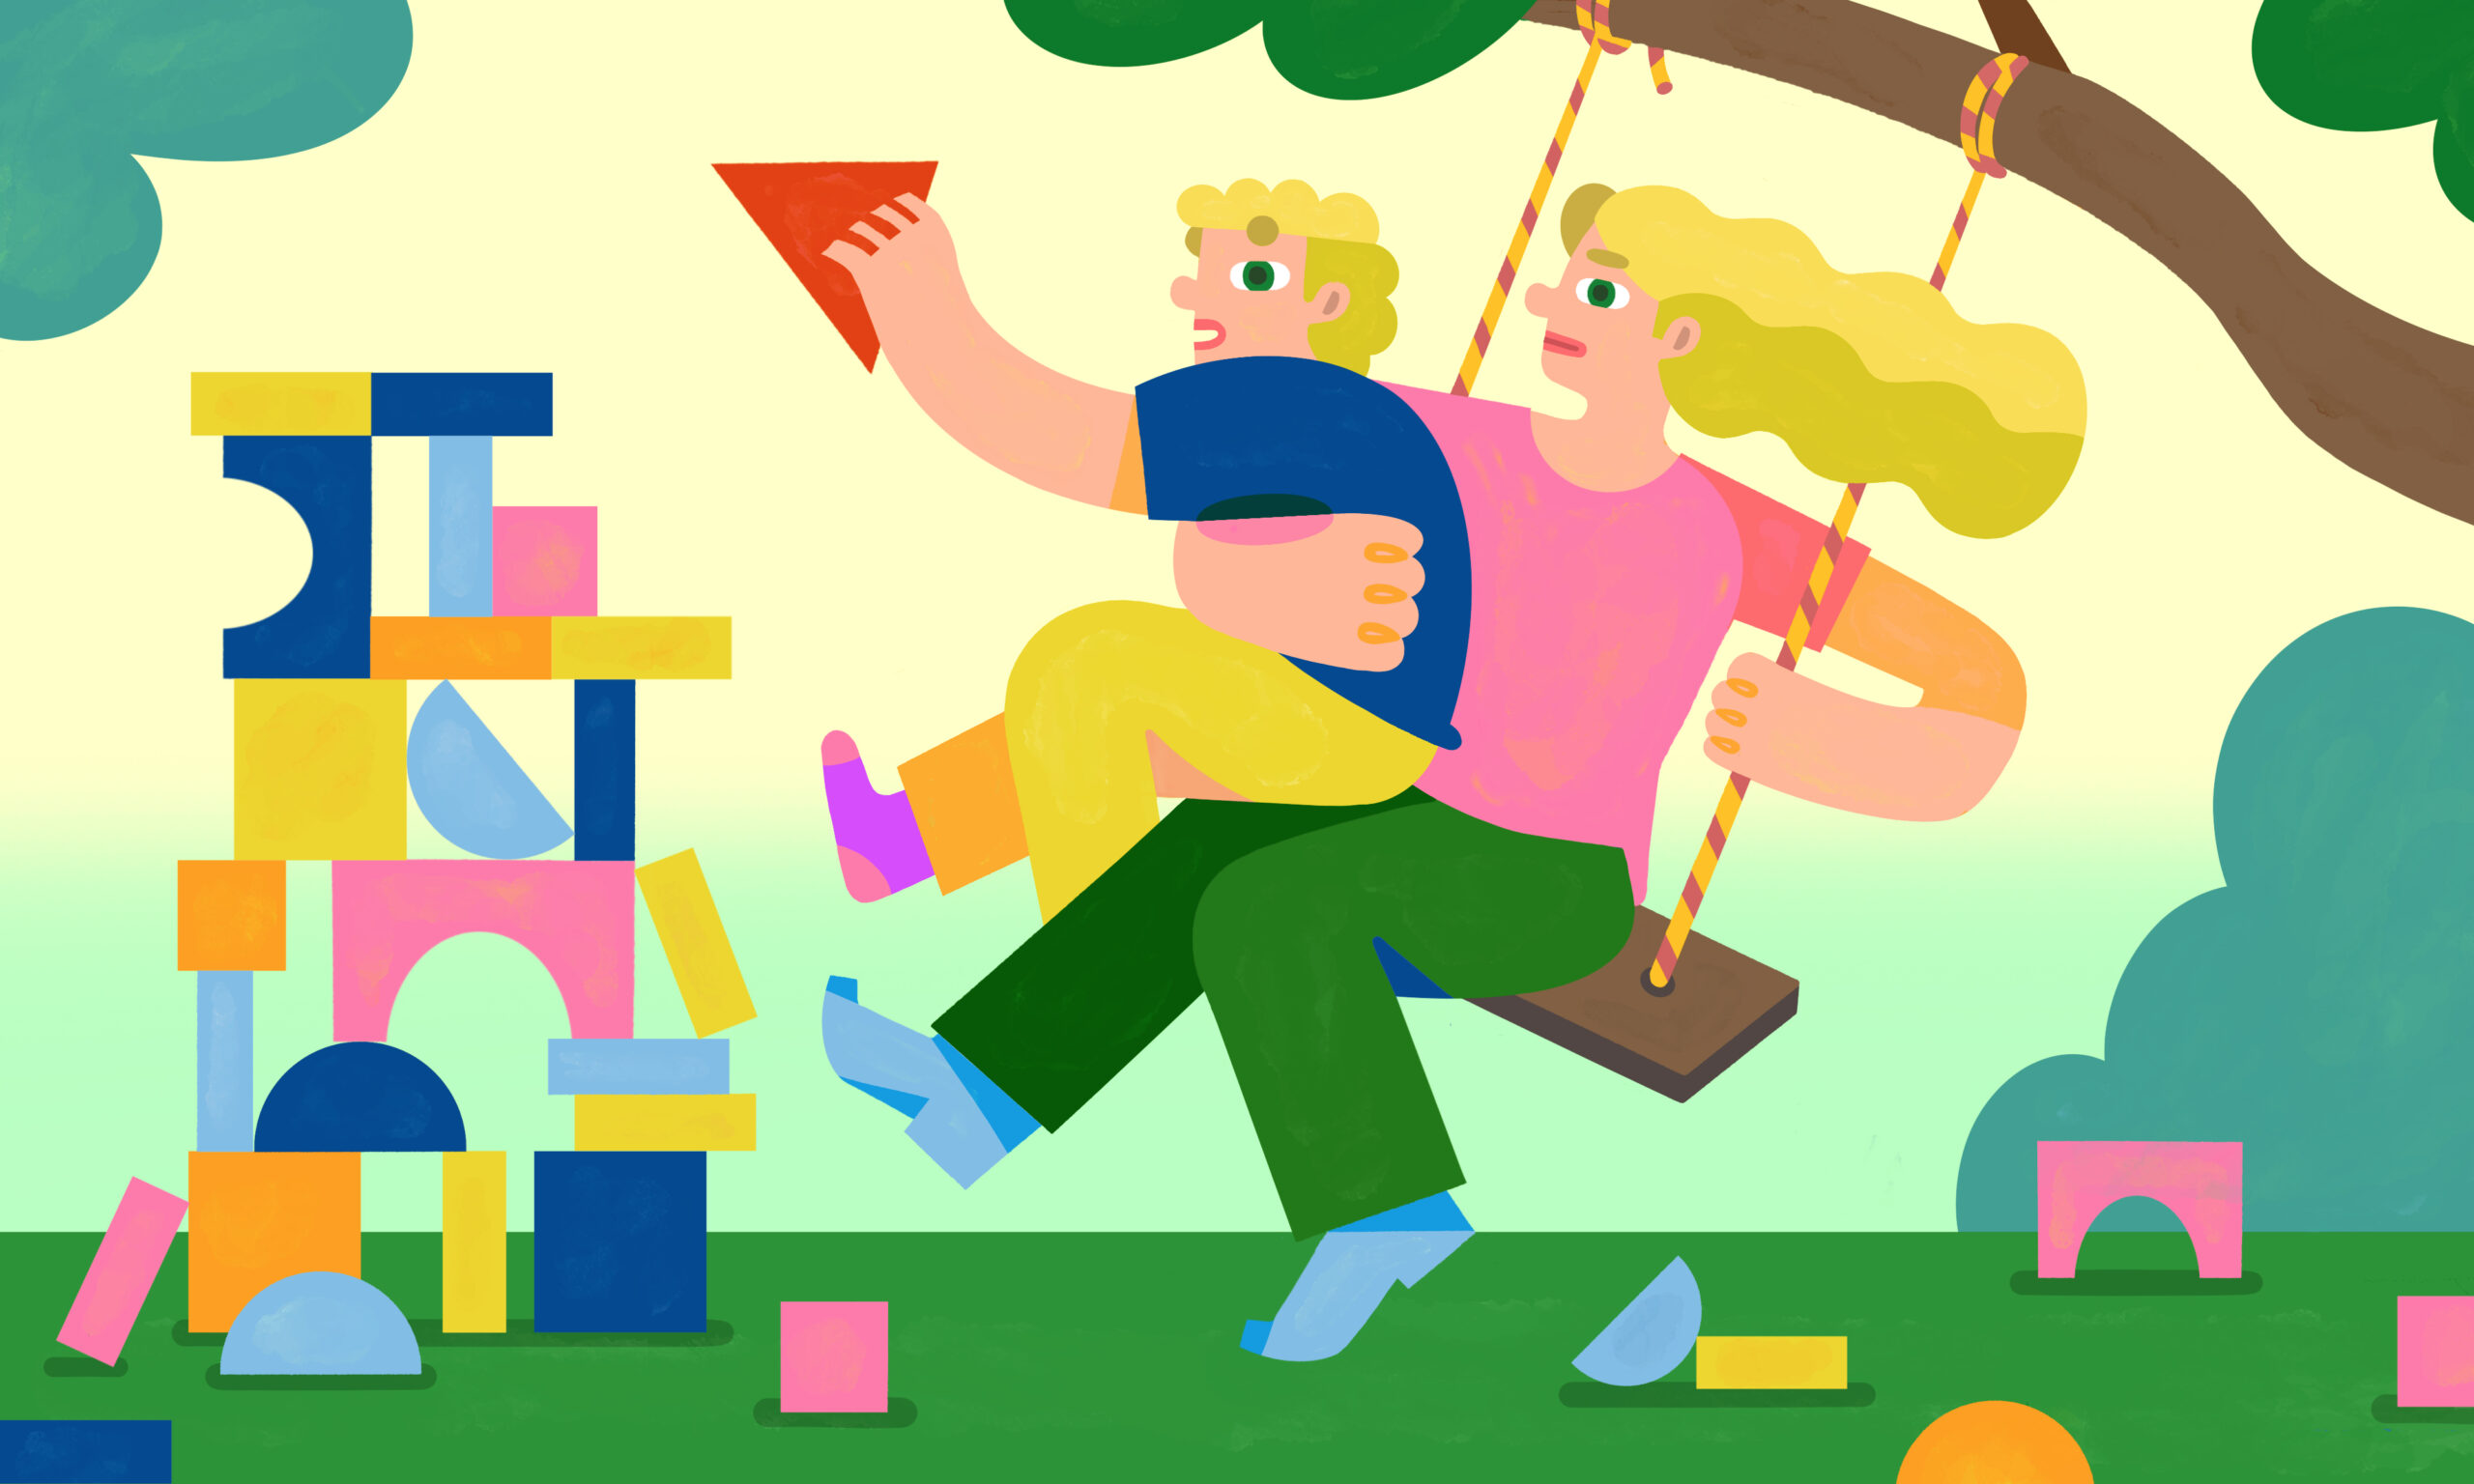 The illustration depicts a mother and her son on a swing. The son is building a house with colorful toy blocks. He sets a red triangle as the roof of the house he built.